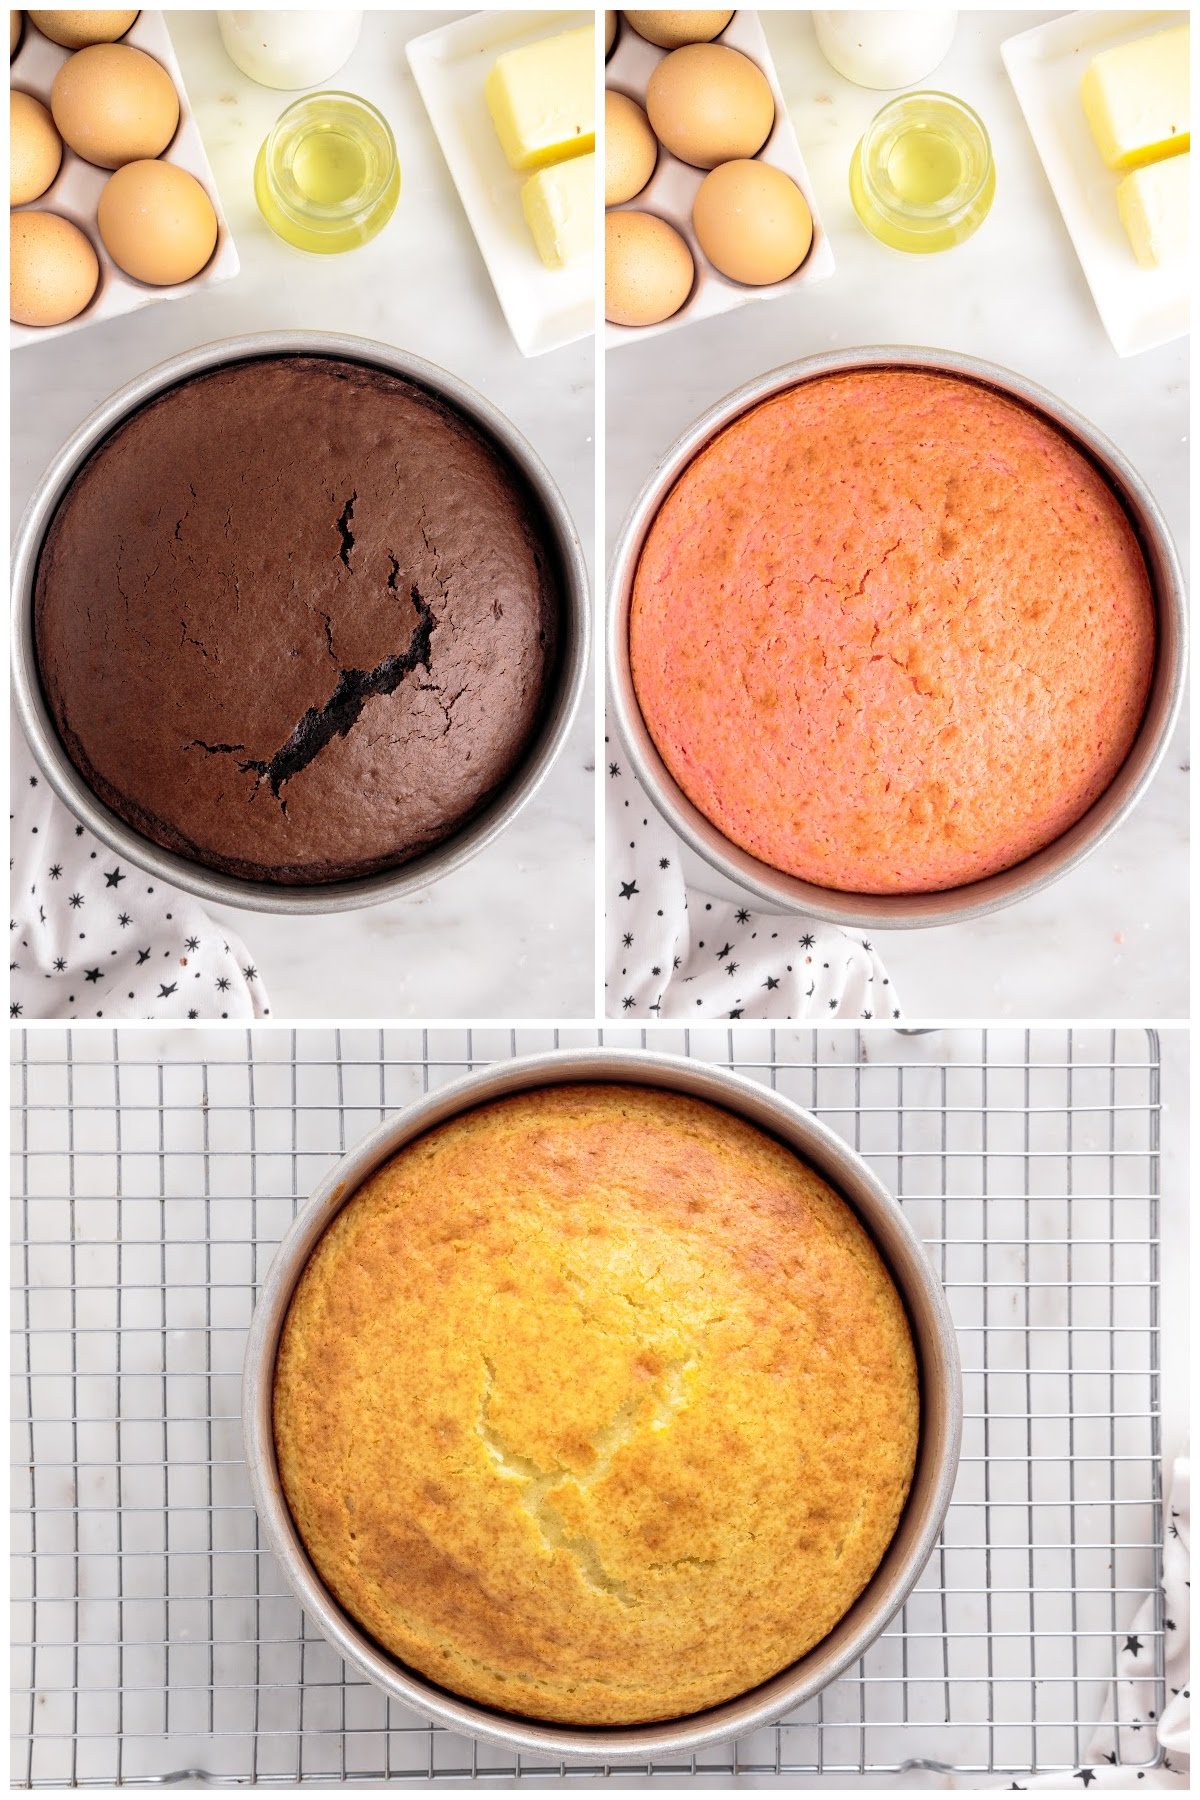 Three baked cakes, one of each flavor.